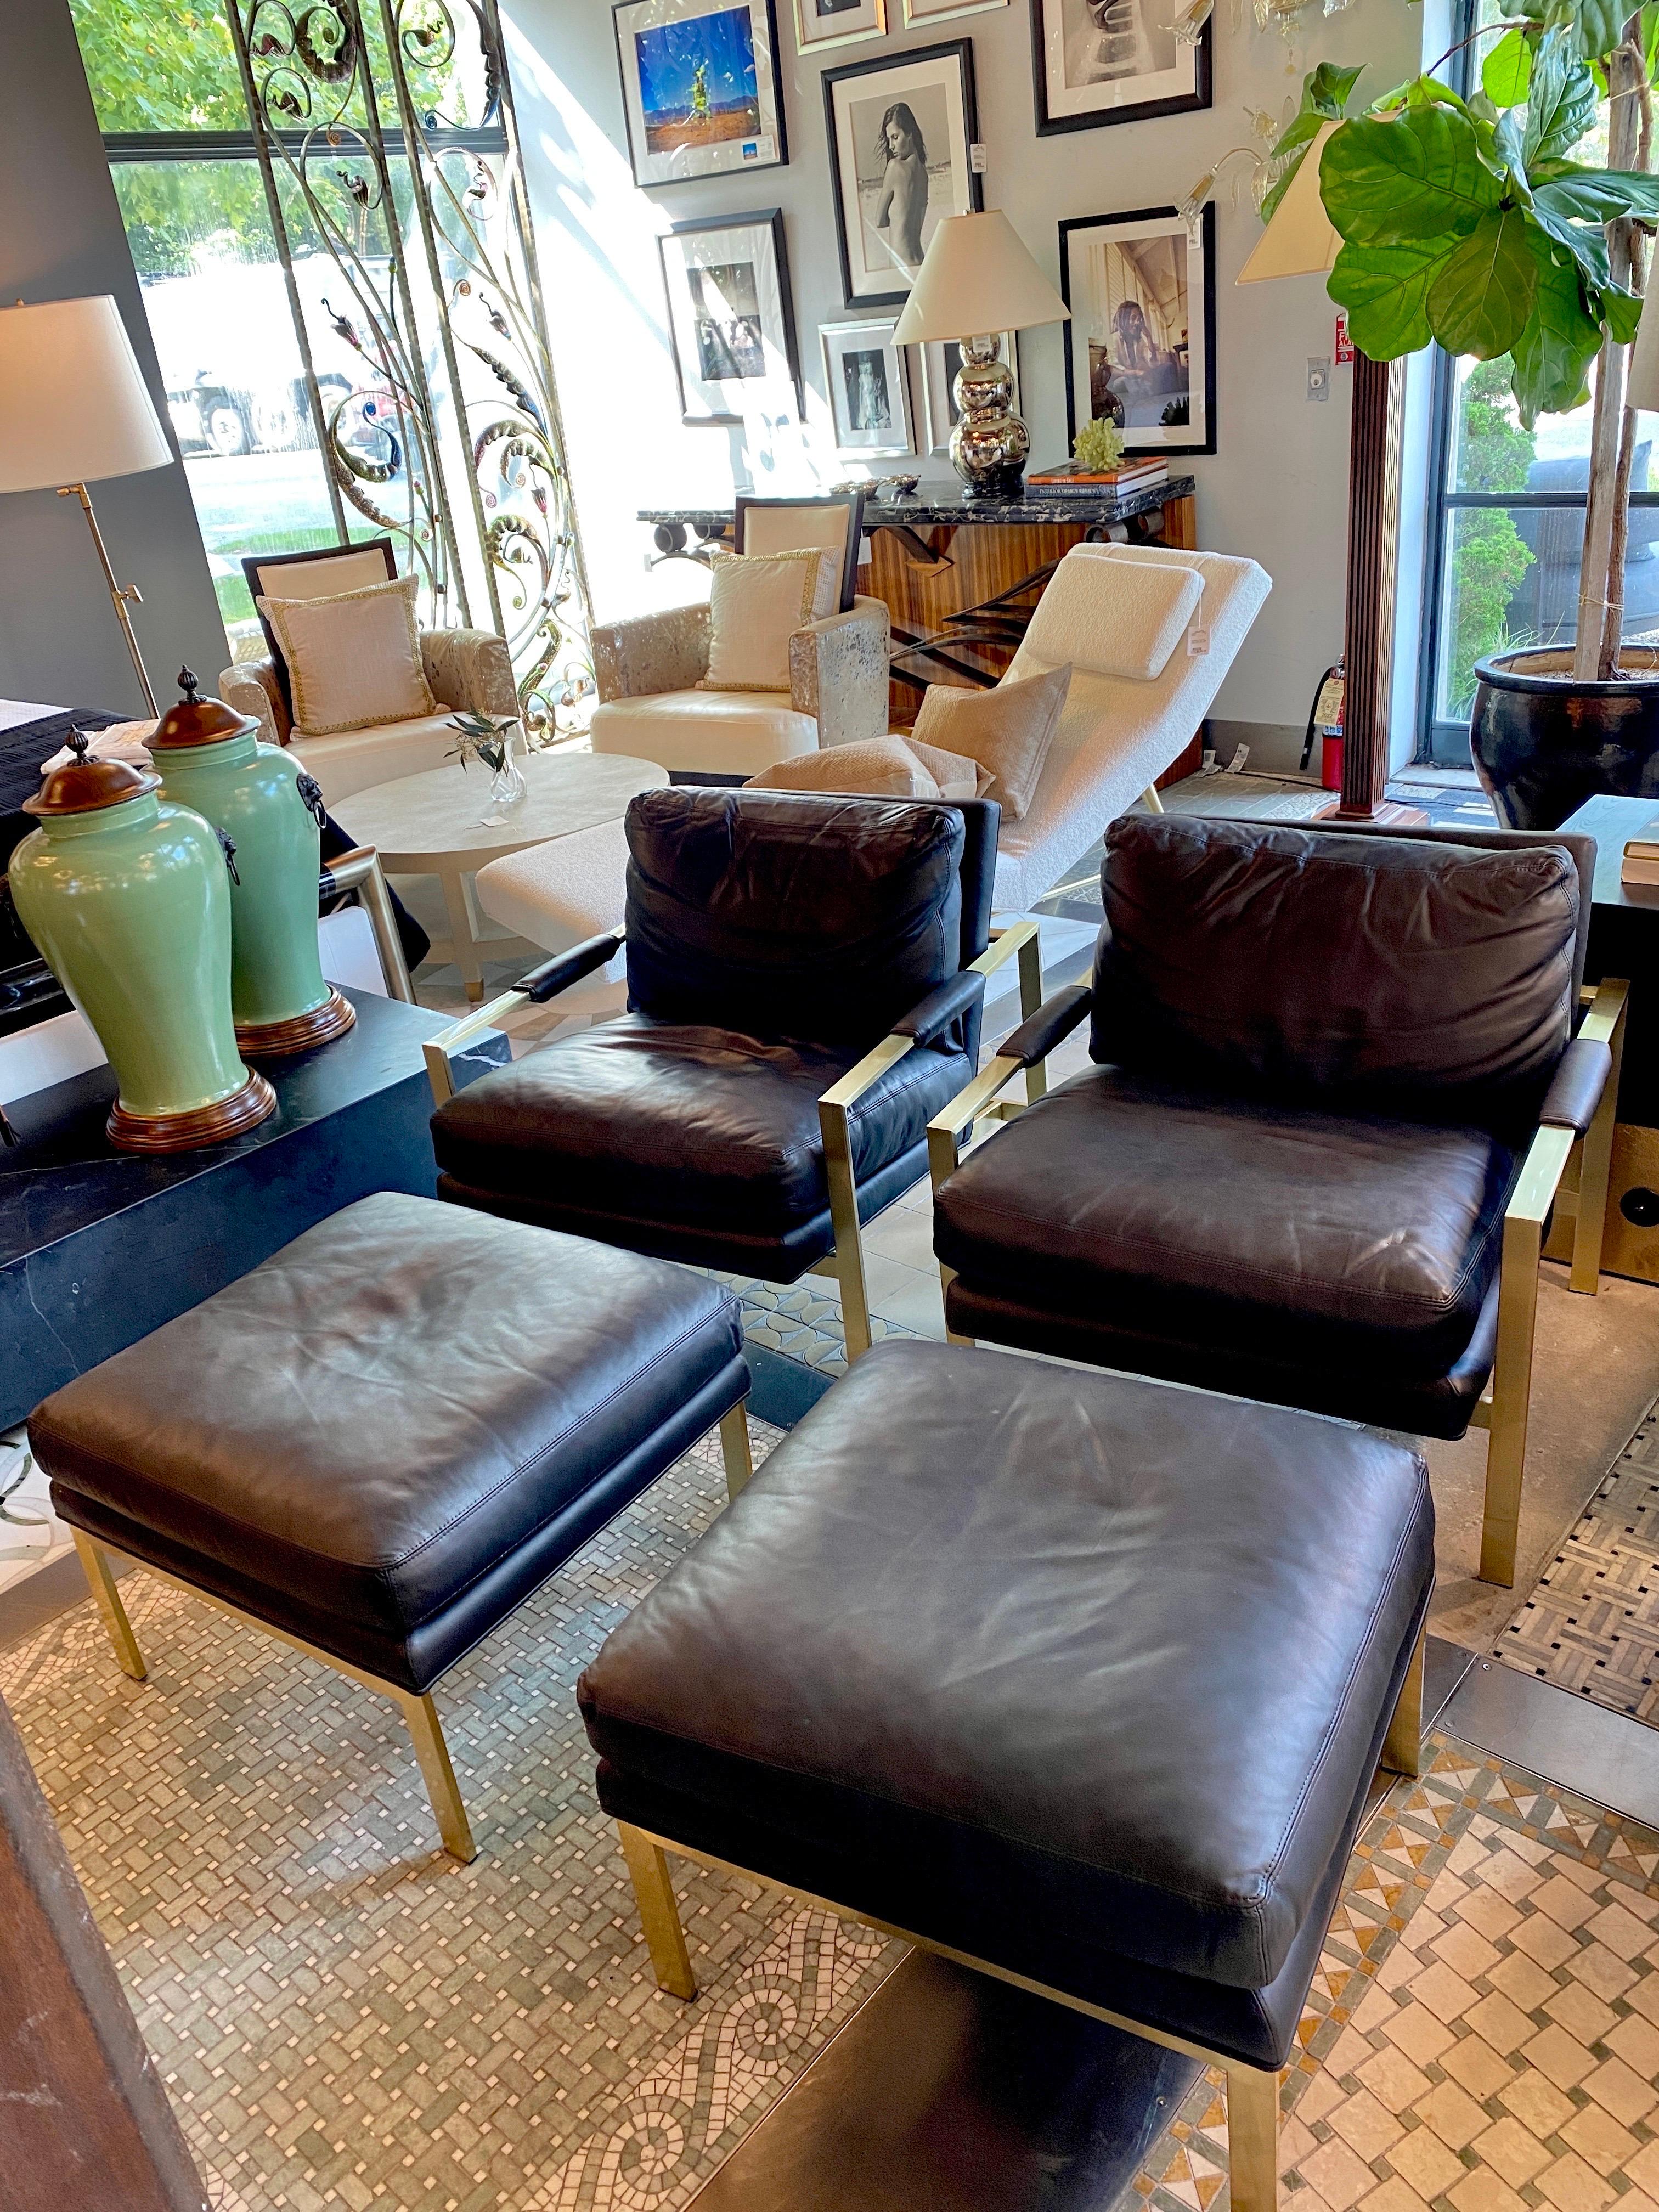 Milo Baughman Model #951leather set of 2 chairs and 2 ottomans, 1966 by Restoration Hardware. 

Chair - 32